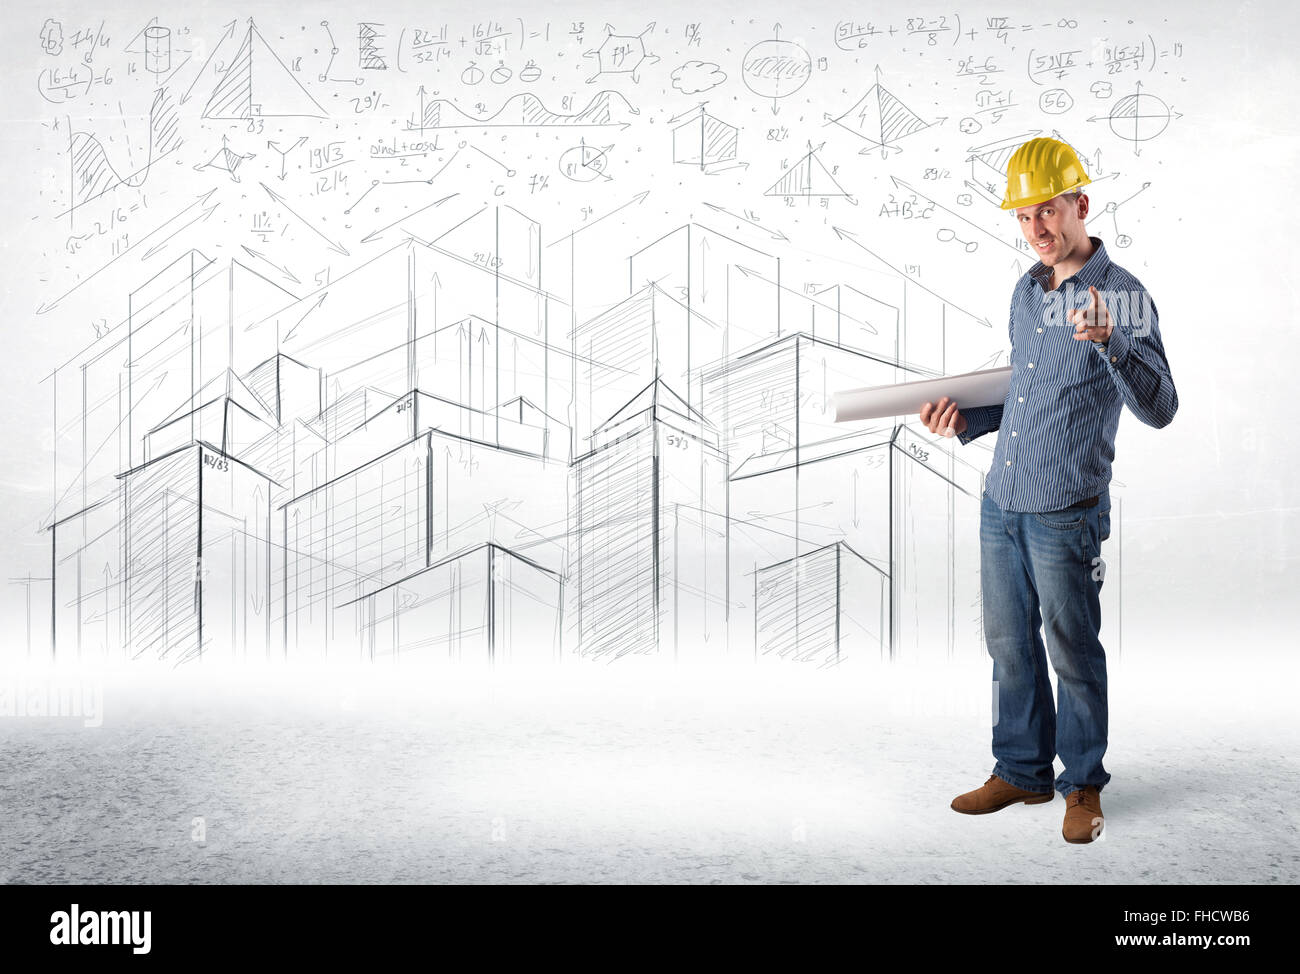 Handsome construction specialist with city drawing in background Stock Photo